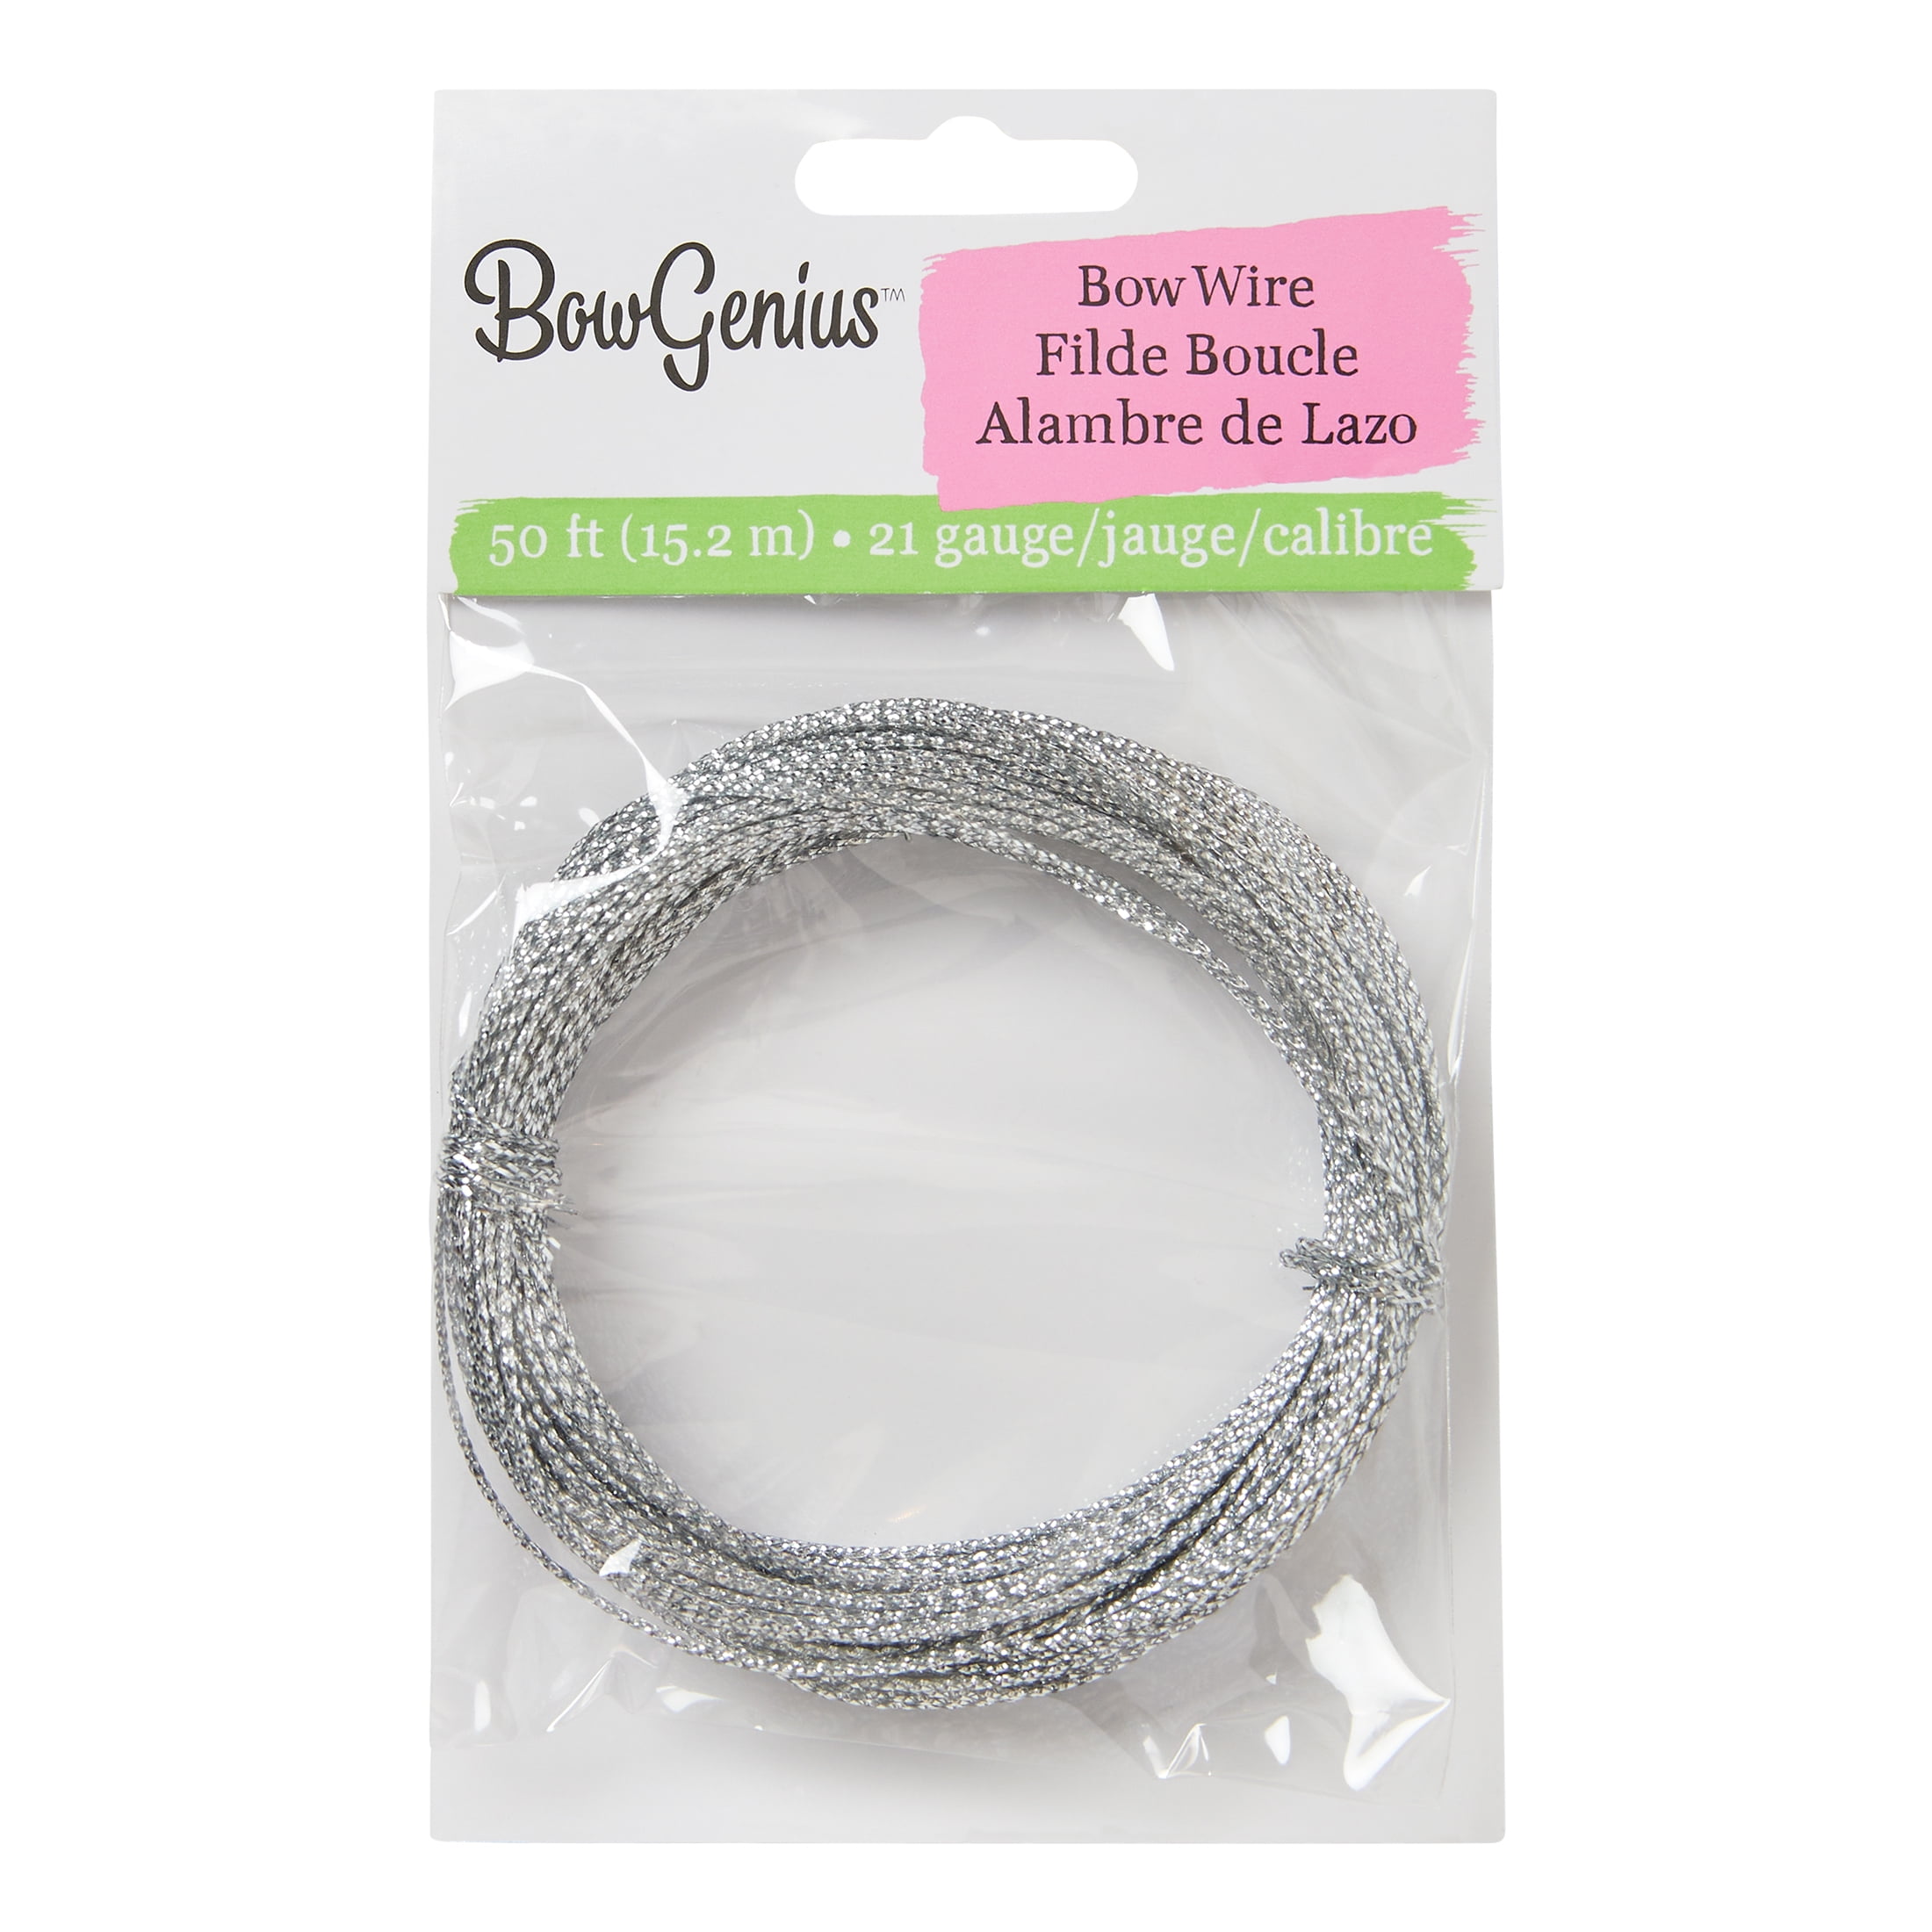 Offray Accessories, 21 Gauge Silver Bow Wire, 50 Feet, perfect for bow making, 1 Package